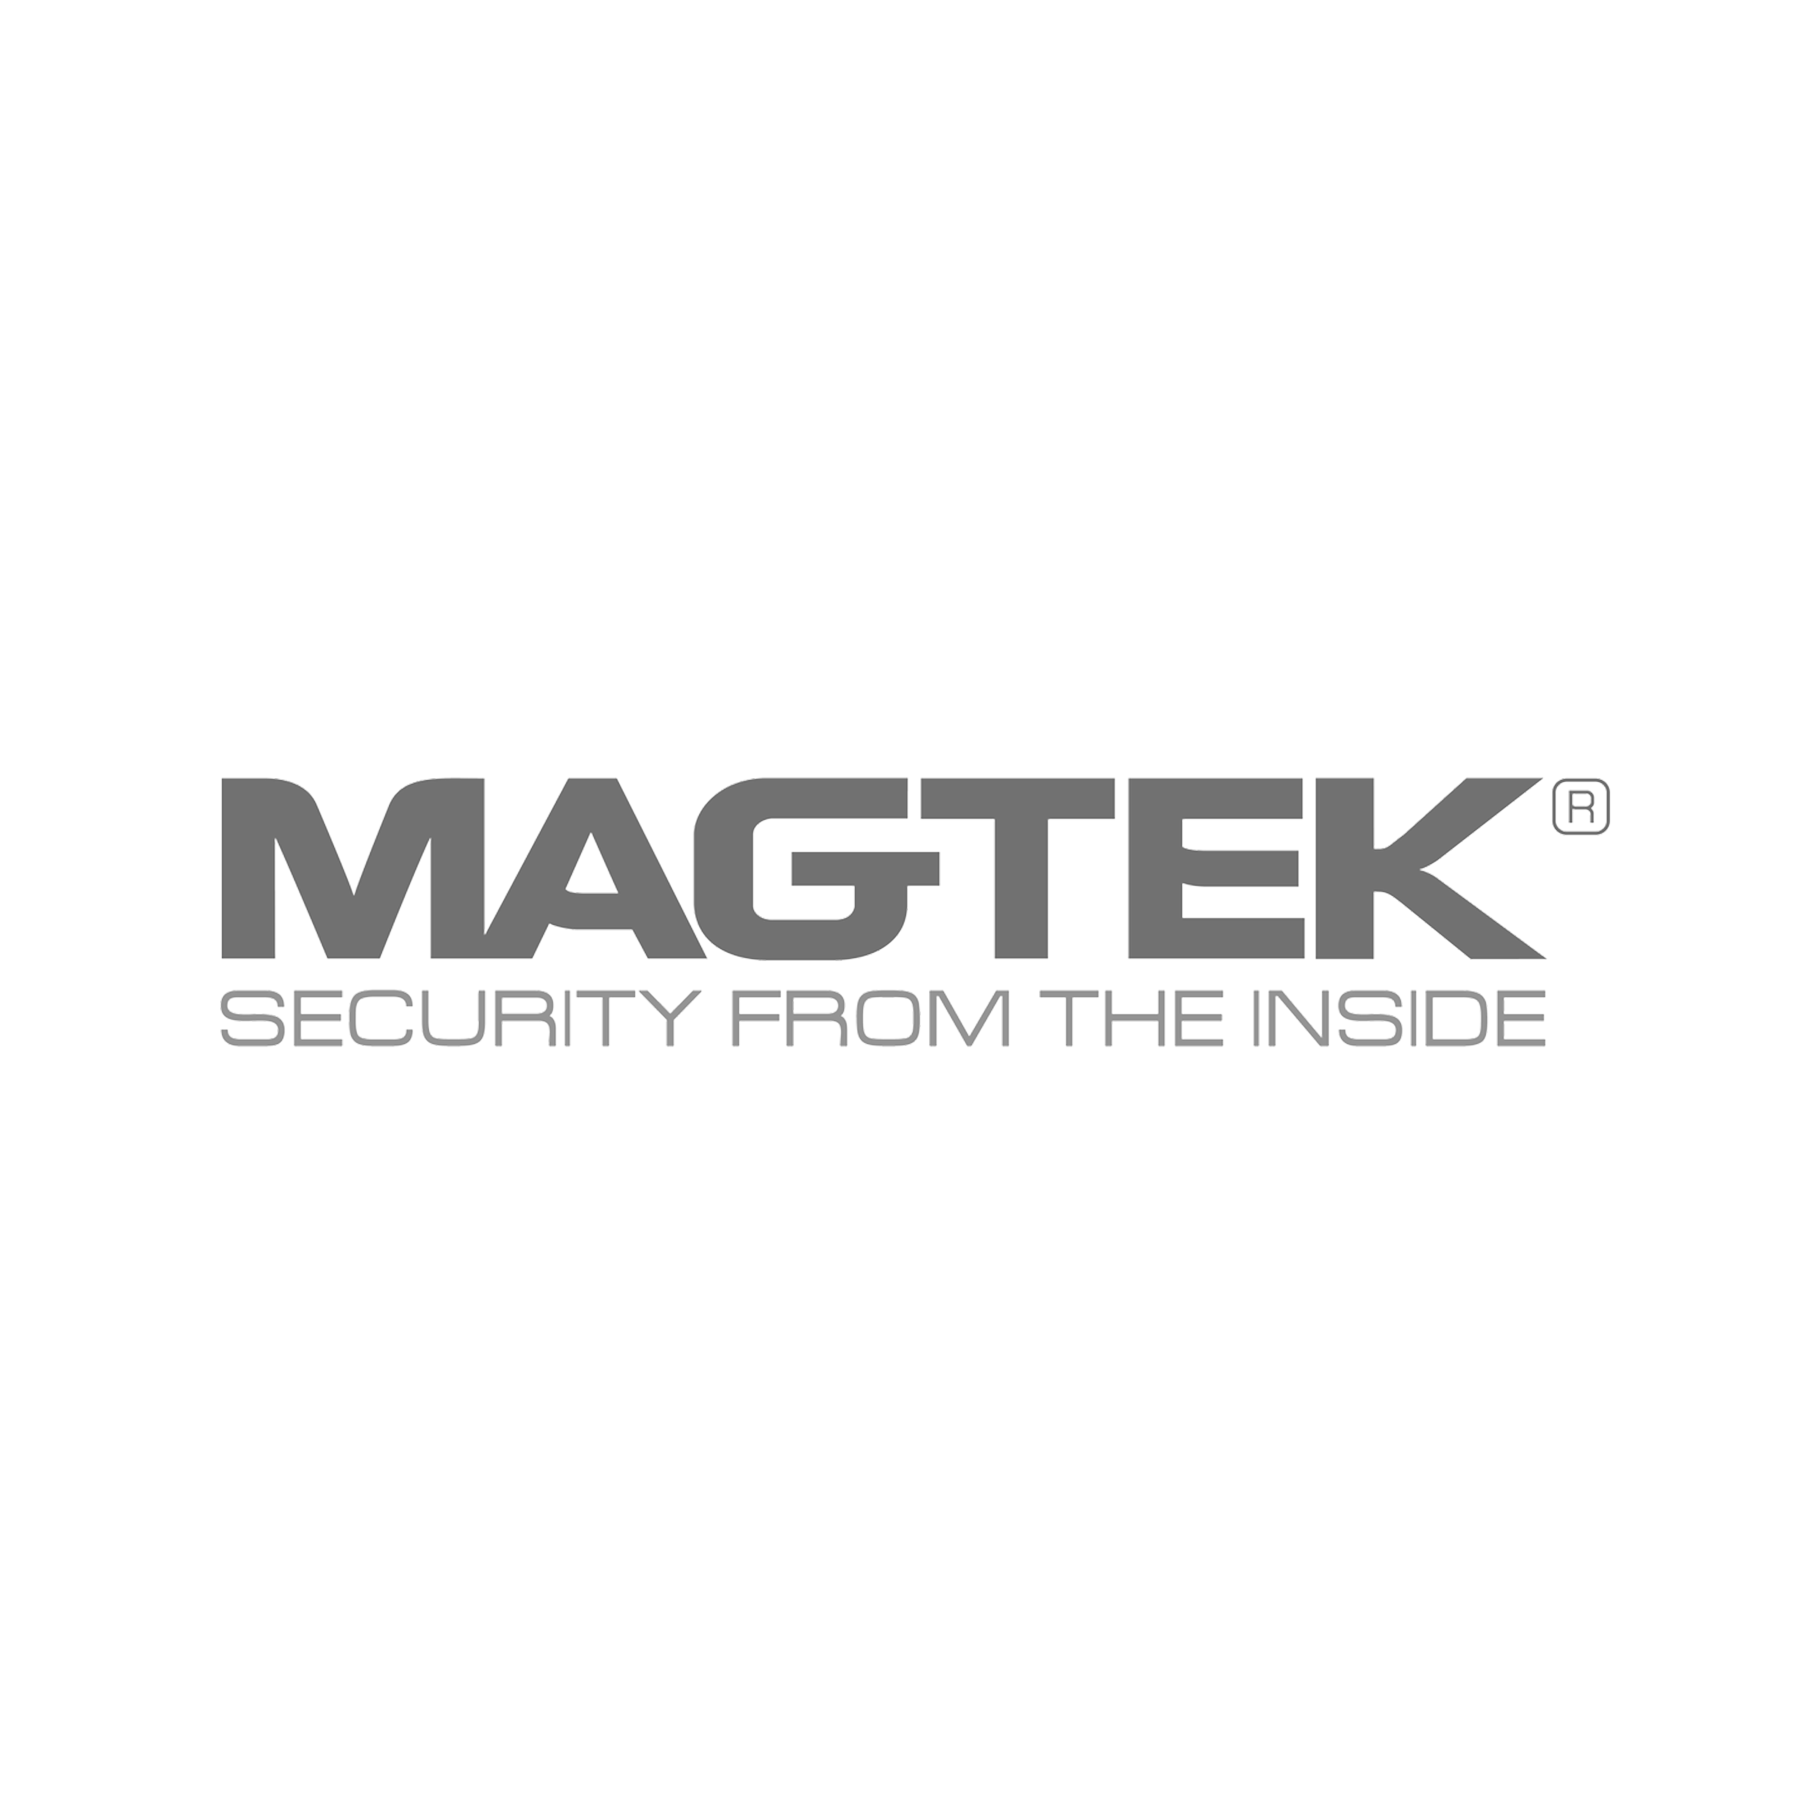  MagTek is the most experienced and innovative provider of secure transaction technology to the payment card industry. MagTek provides PCI-compliant products that process, encrypt, tokenize and authenticate millions of magnetic card transactions dail